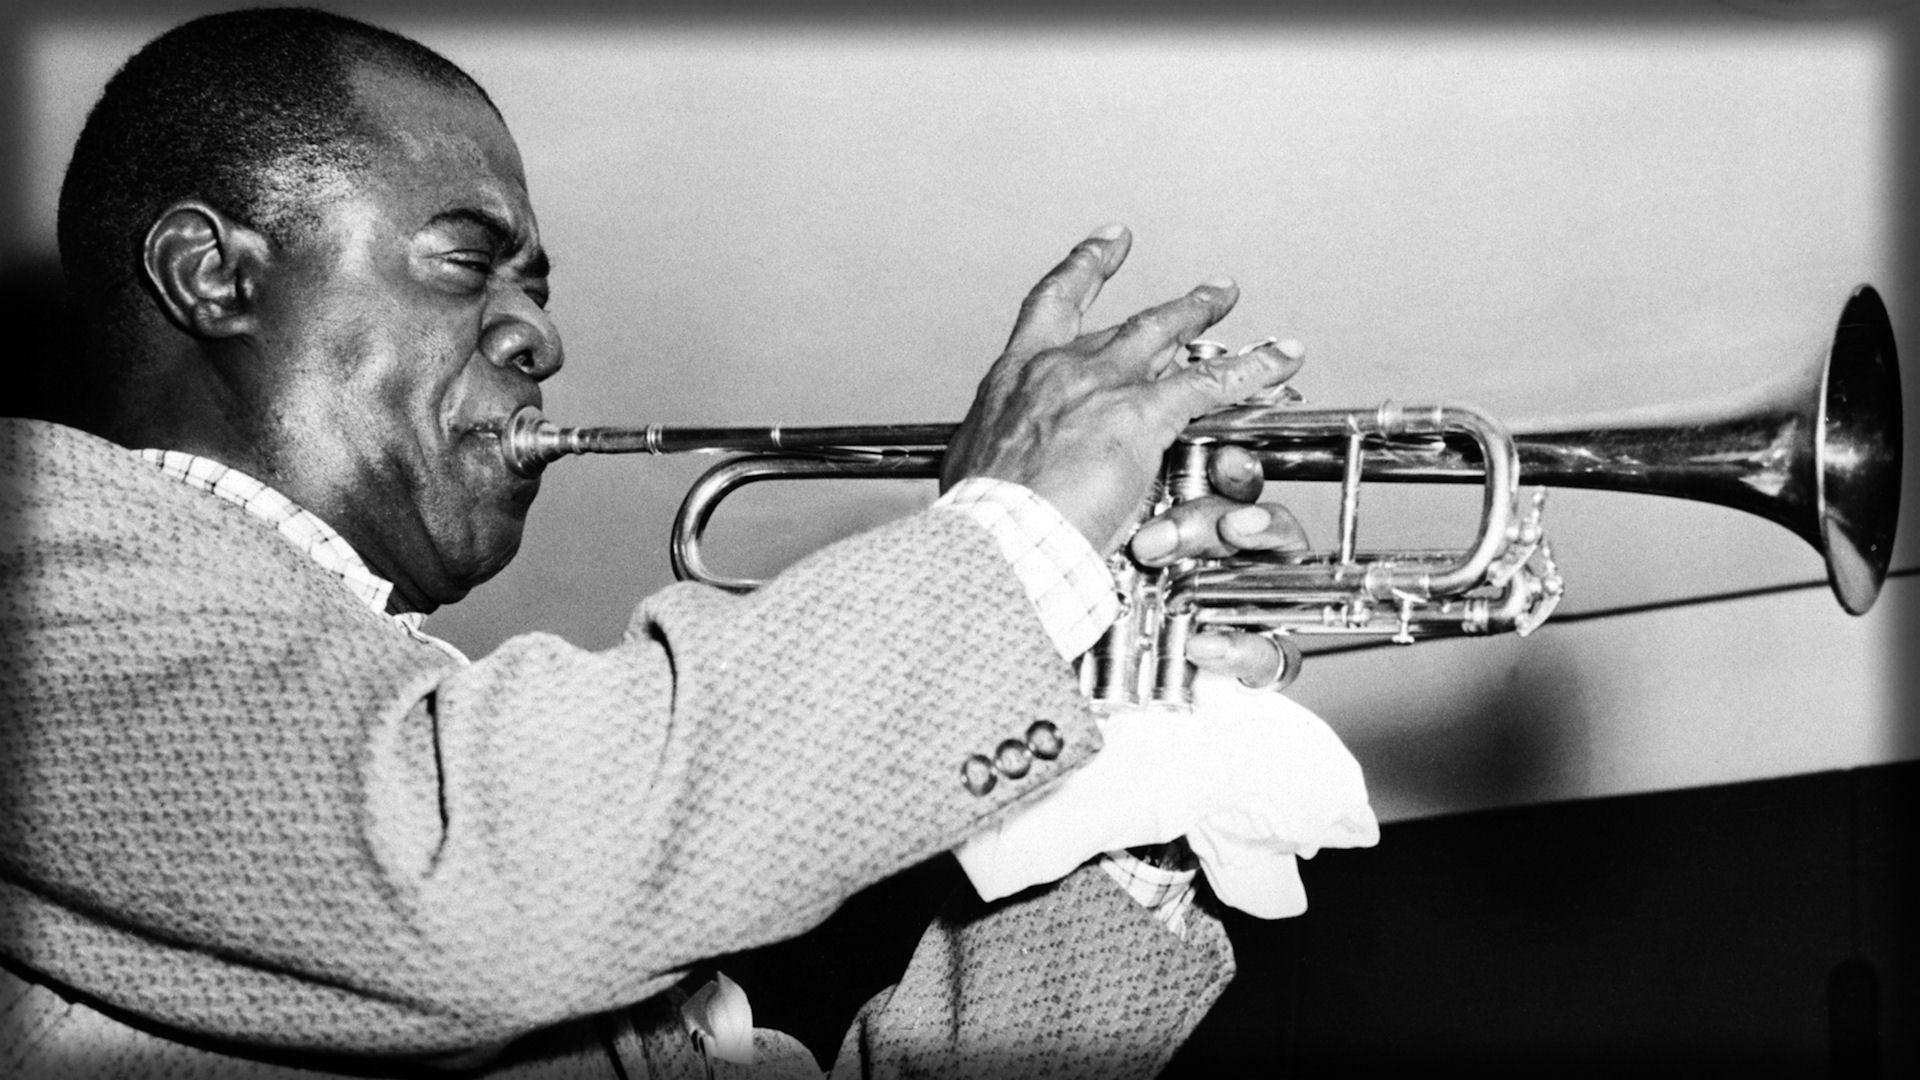 Download Wallpaper 1920x1080 louis armstrong, pipe, jacket, face